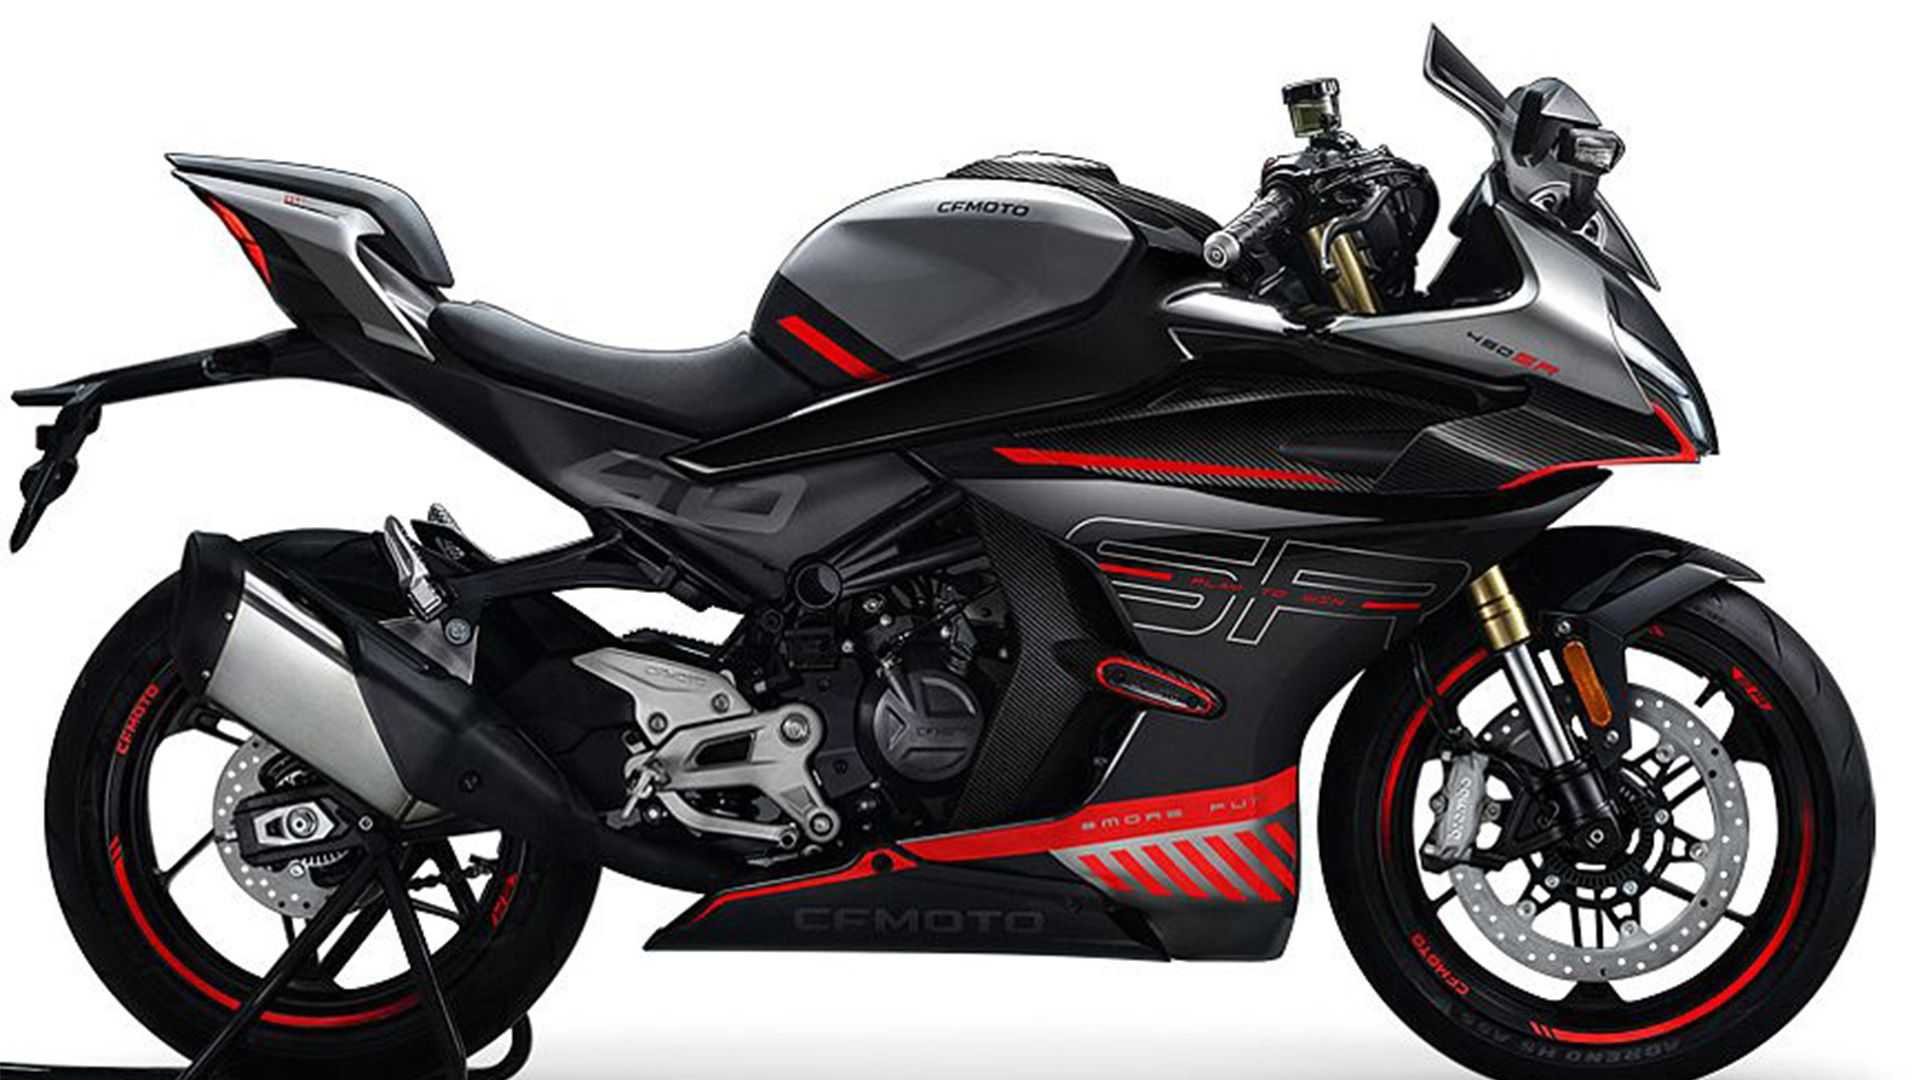 cfmoto-450sr-is-coming-to-malaysia-in-october-ministry-of-superbike